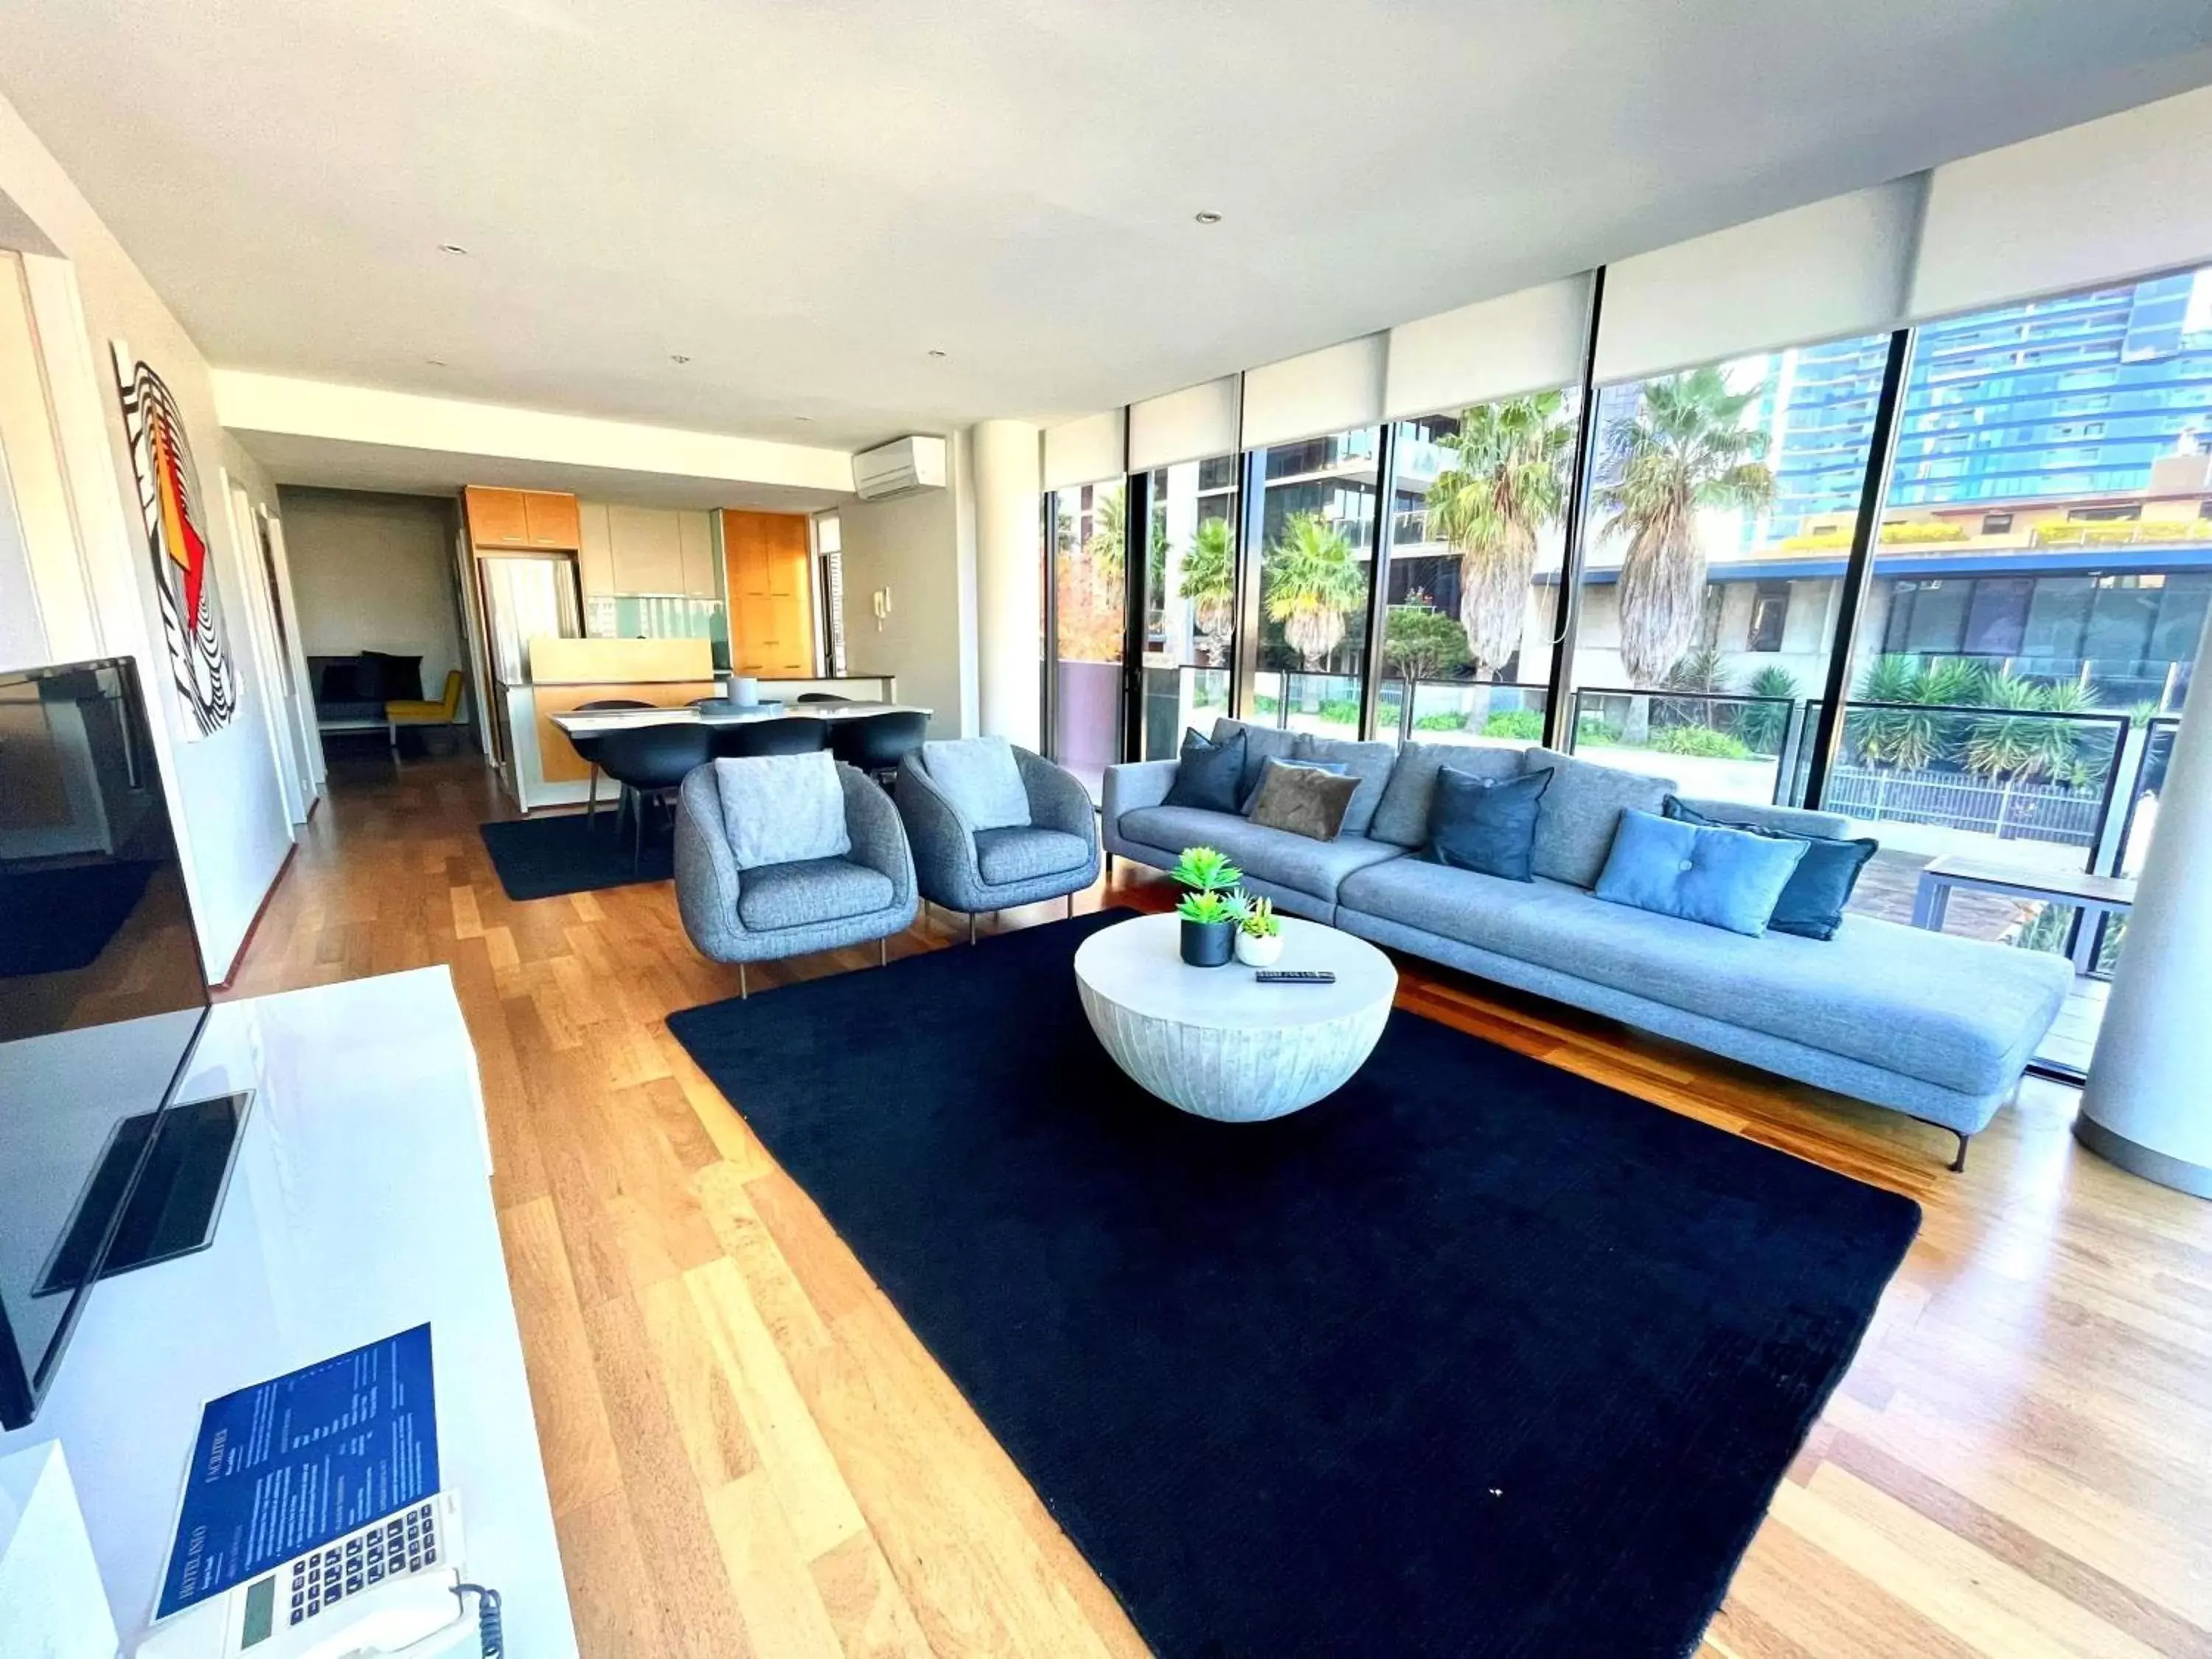 Three-Bedroom, Two Bathroom Apartment with Balcony and Water View in The Sebel Residences Melbourne Docklands Serviced Apartments